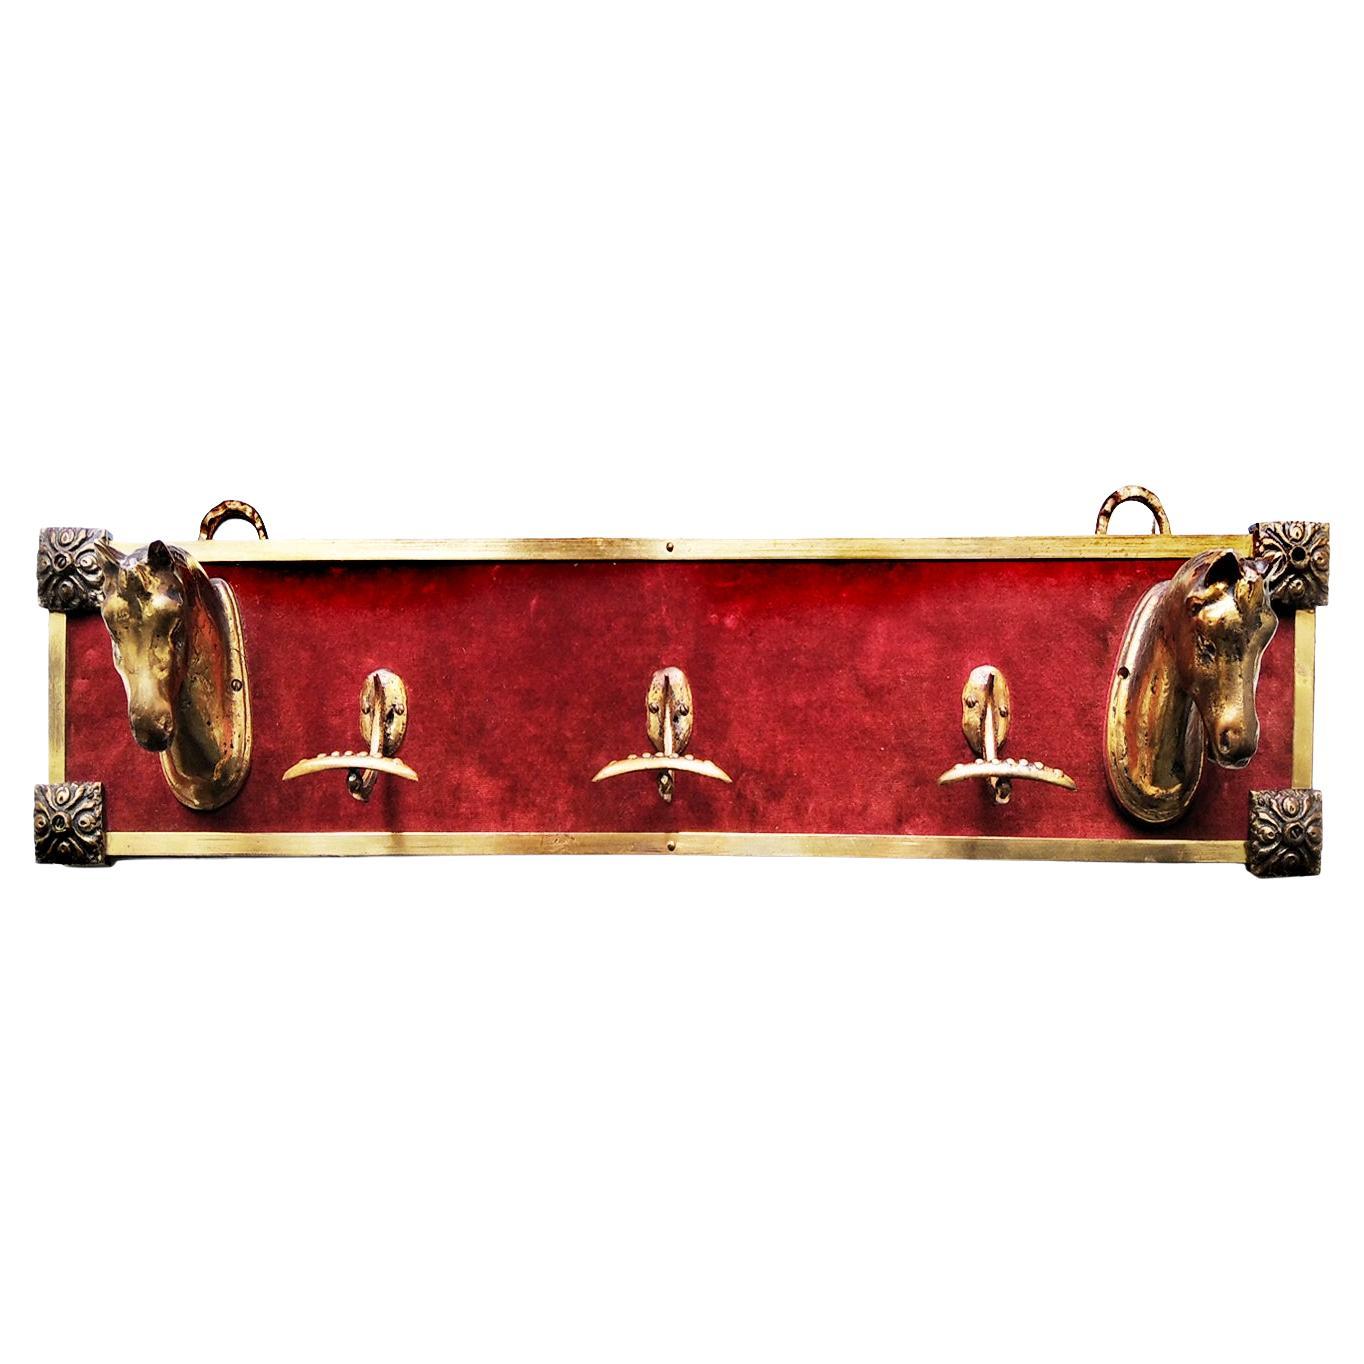 Wall coat rack in brass and velvet
It is a high quality piece

Beautiful wall coat rack with 5 hangers, two of them with a precious horse head sculpture in solid bronze on a red / maroon velvet mantle framed

 It is a coat rack of good quality and